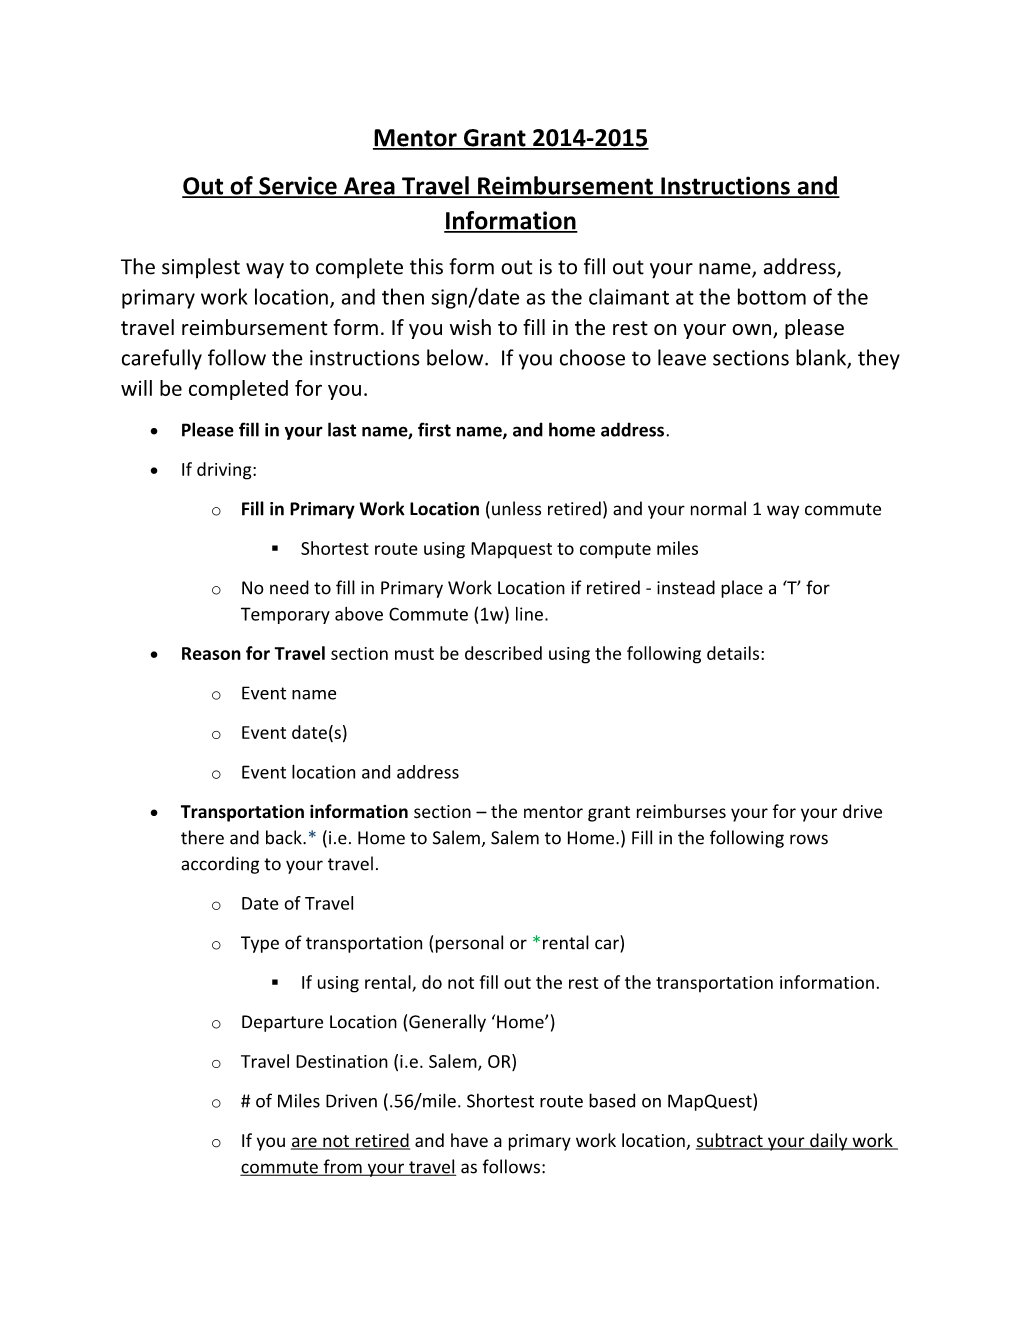 Out of Service Area Travel Reimbursement Instructions and Information